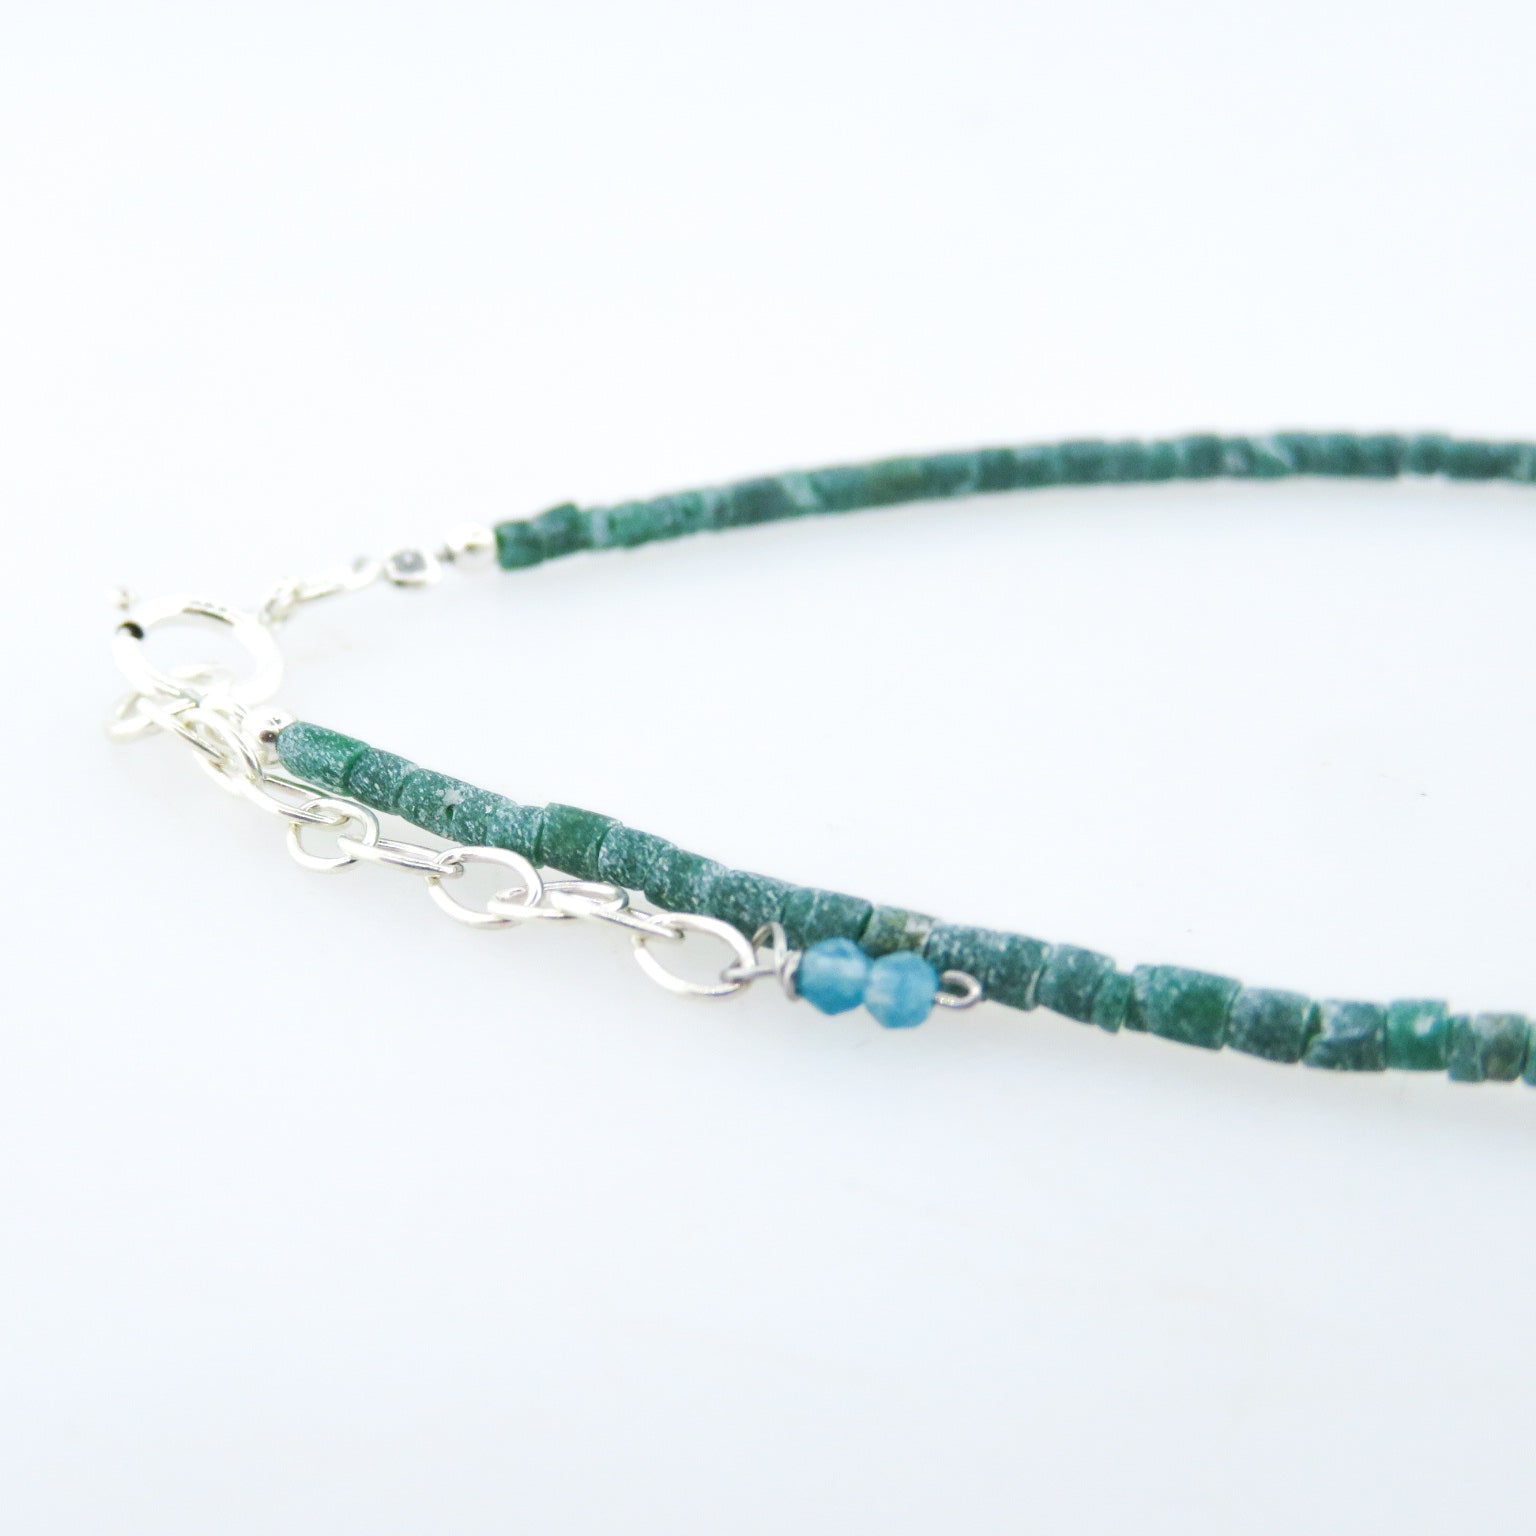 Emerald Bracelet with Blue Topaz and Silver Beads